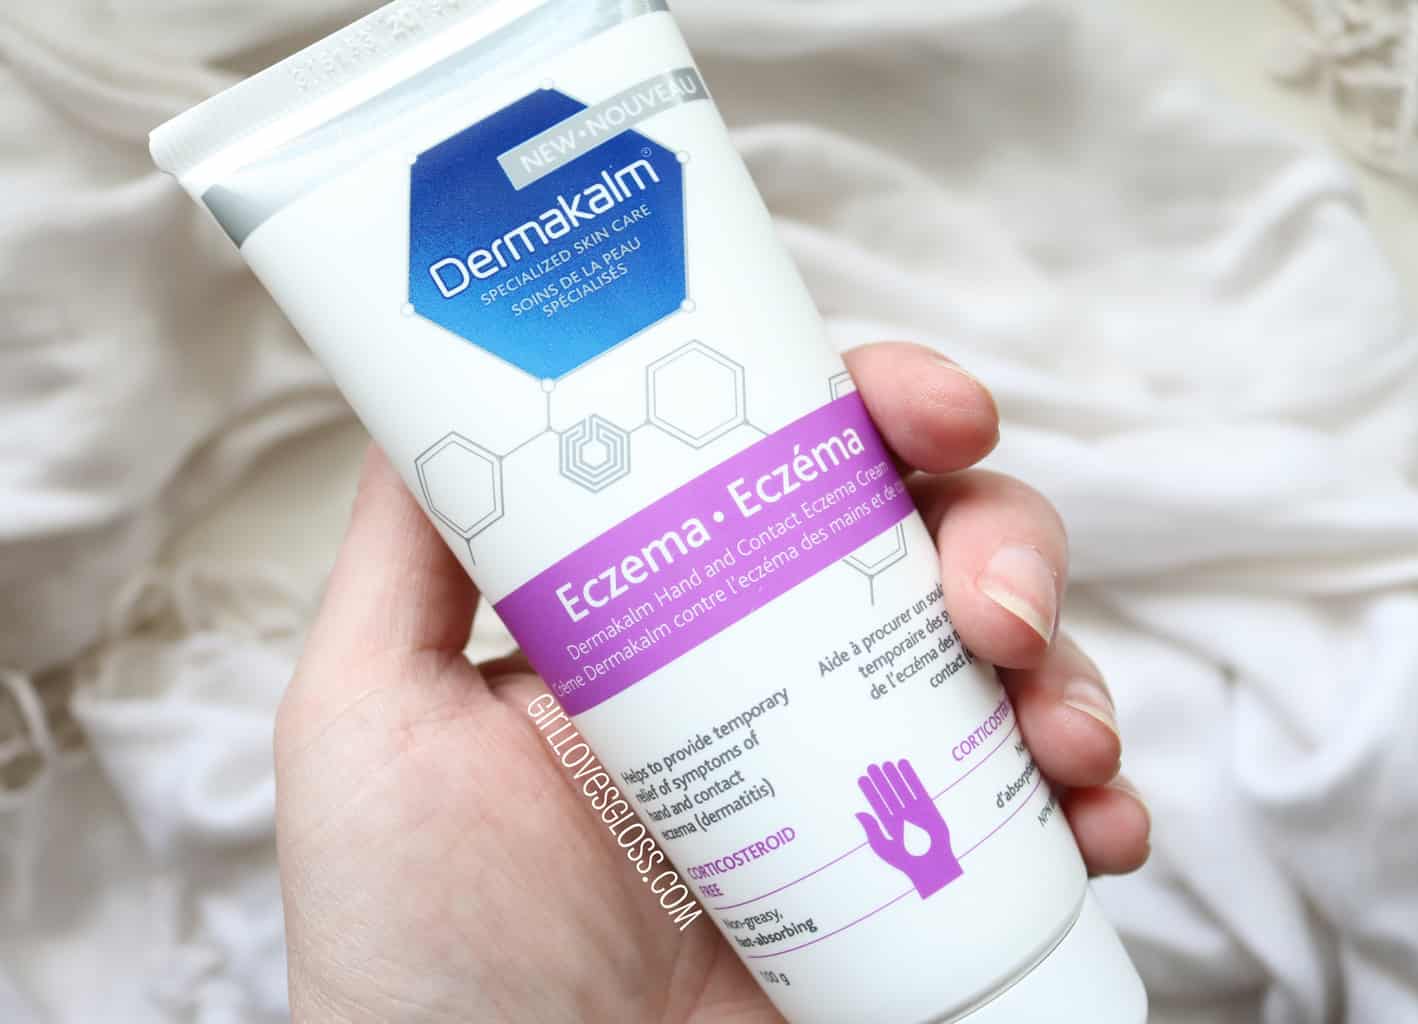 Attention Moms and Eczema Sufferers – You’re Going to Need This Hand Cream